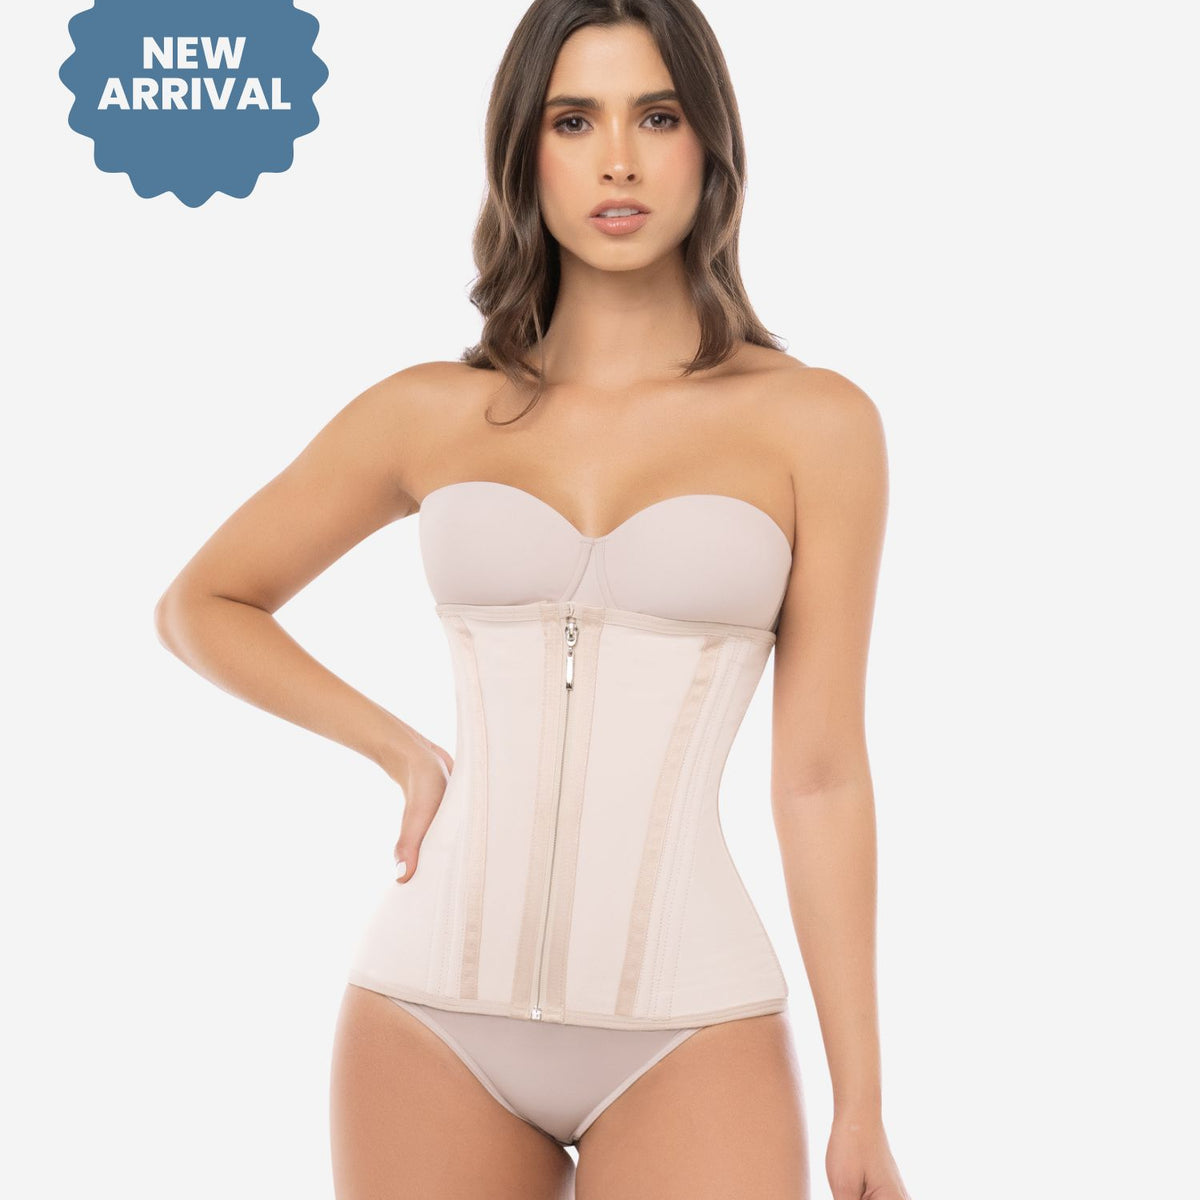 CYSM Shapers  Elevate your confidence with CYSM Premium Shapewear